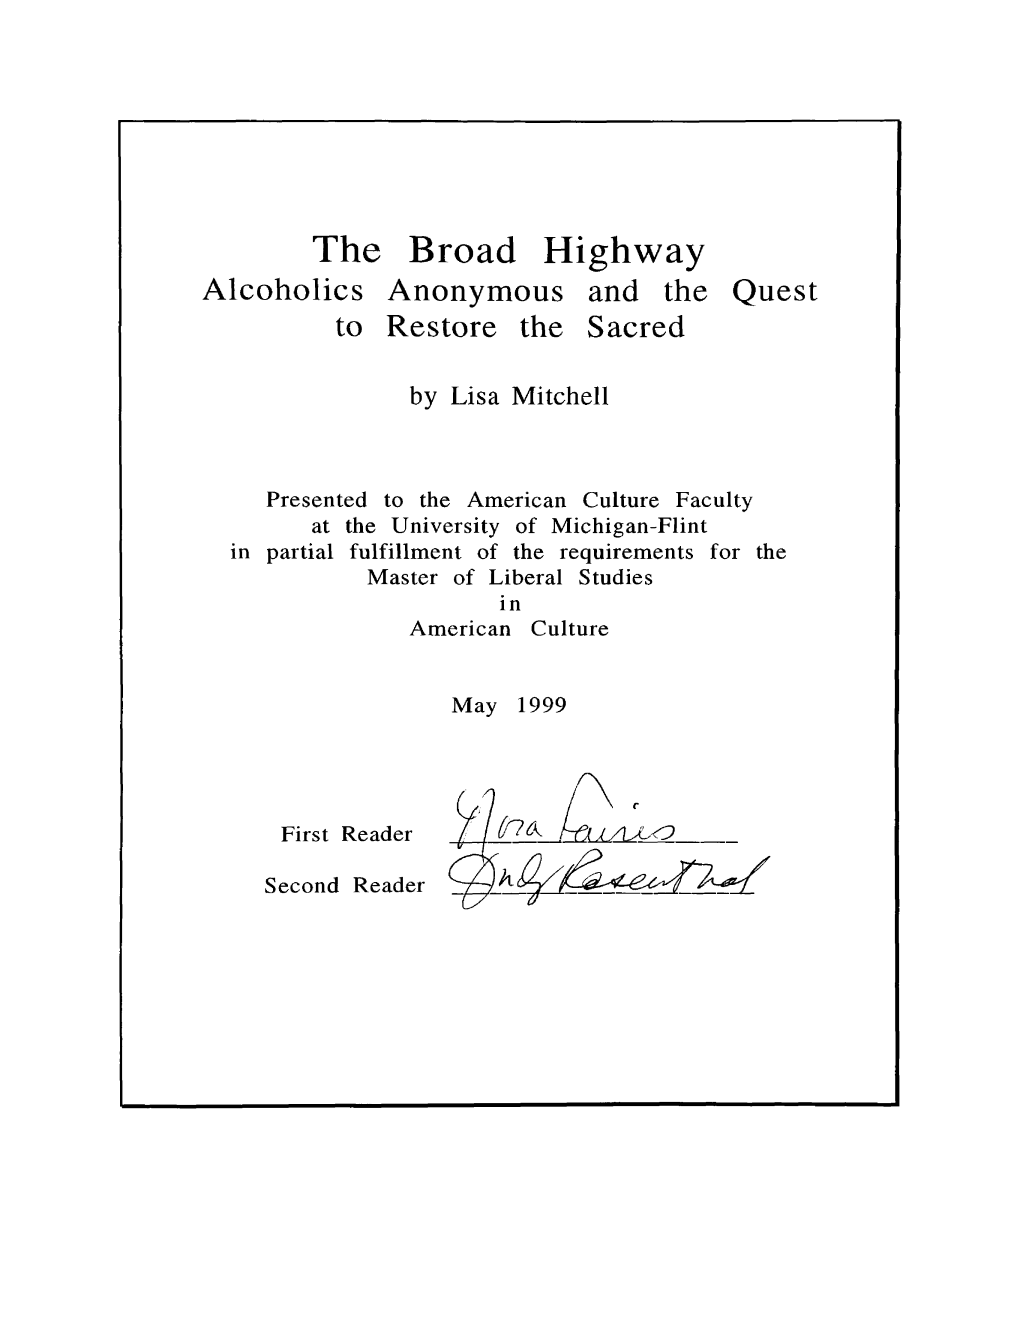 The Broad Highway Alcoholics Anonymous and the Quest to Restore the Sacred